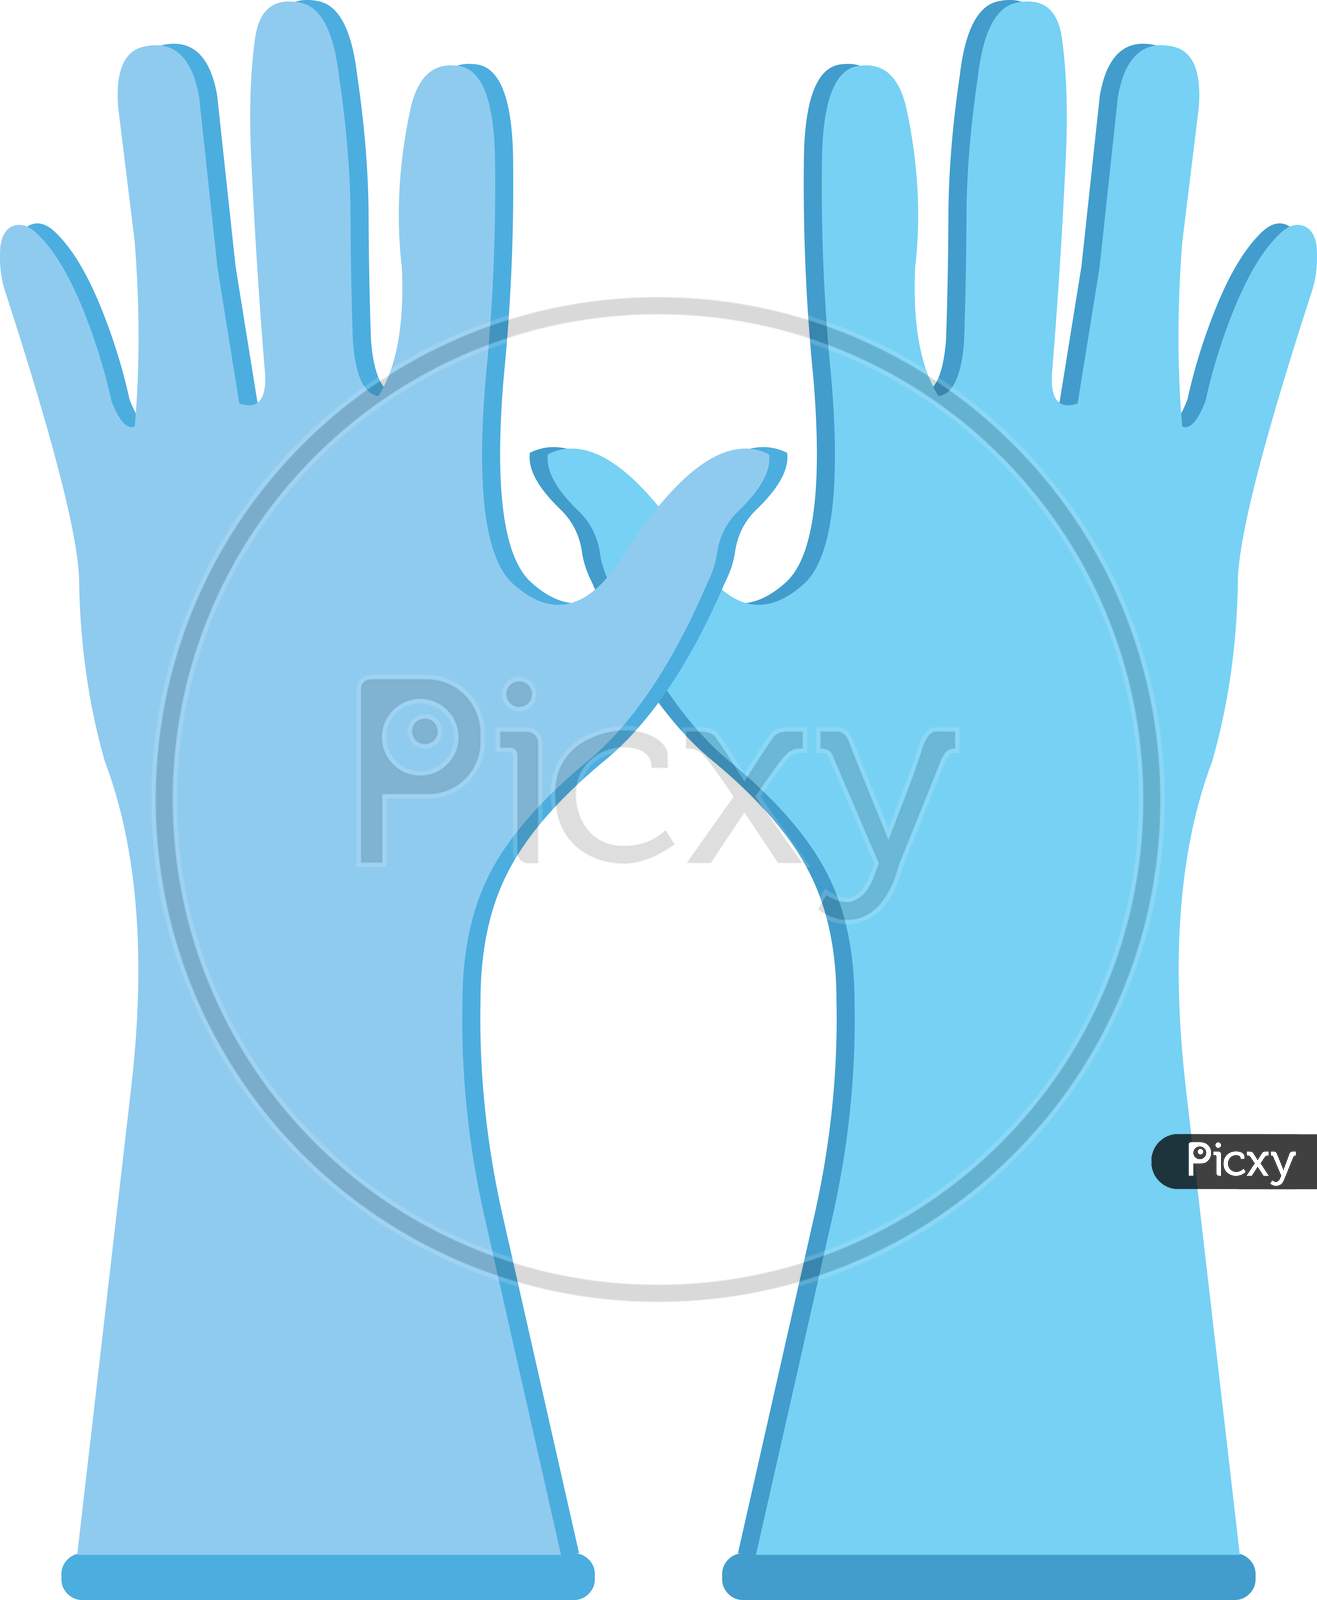 Vector Image of Disposable Surgical Gloves, a Personal Protective Equipment